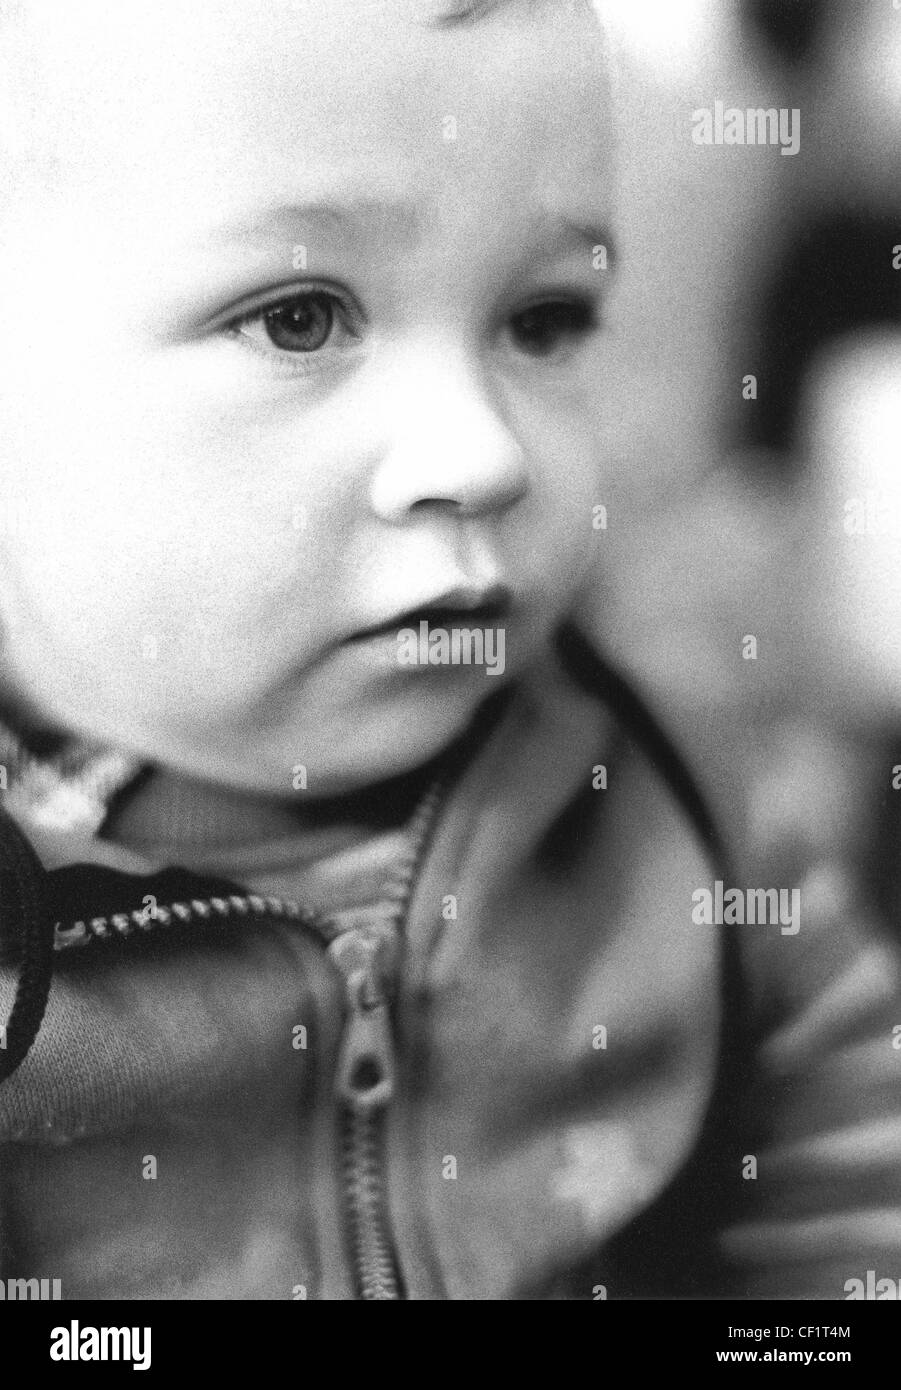 'FACES OF ALFI' Baby with serious expression Stock Photo